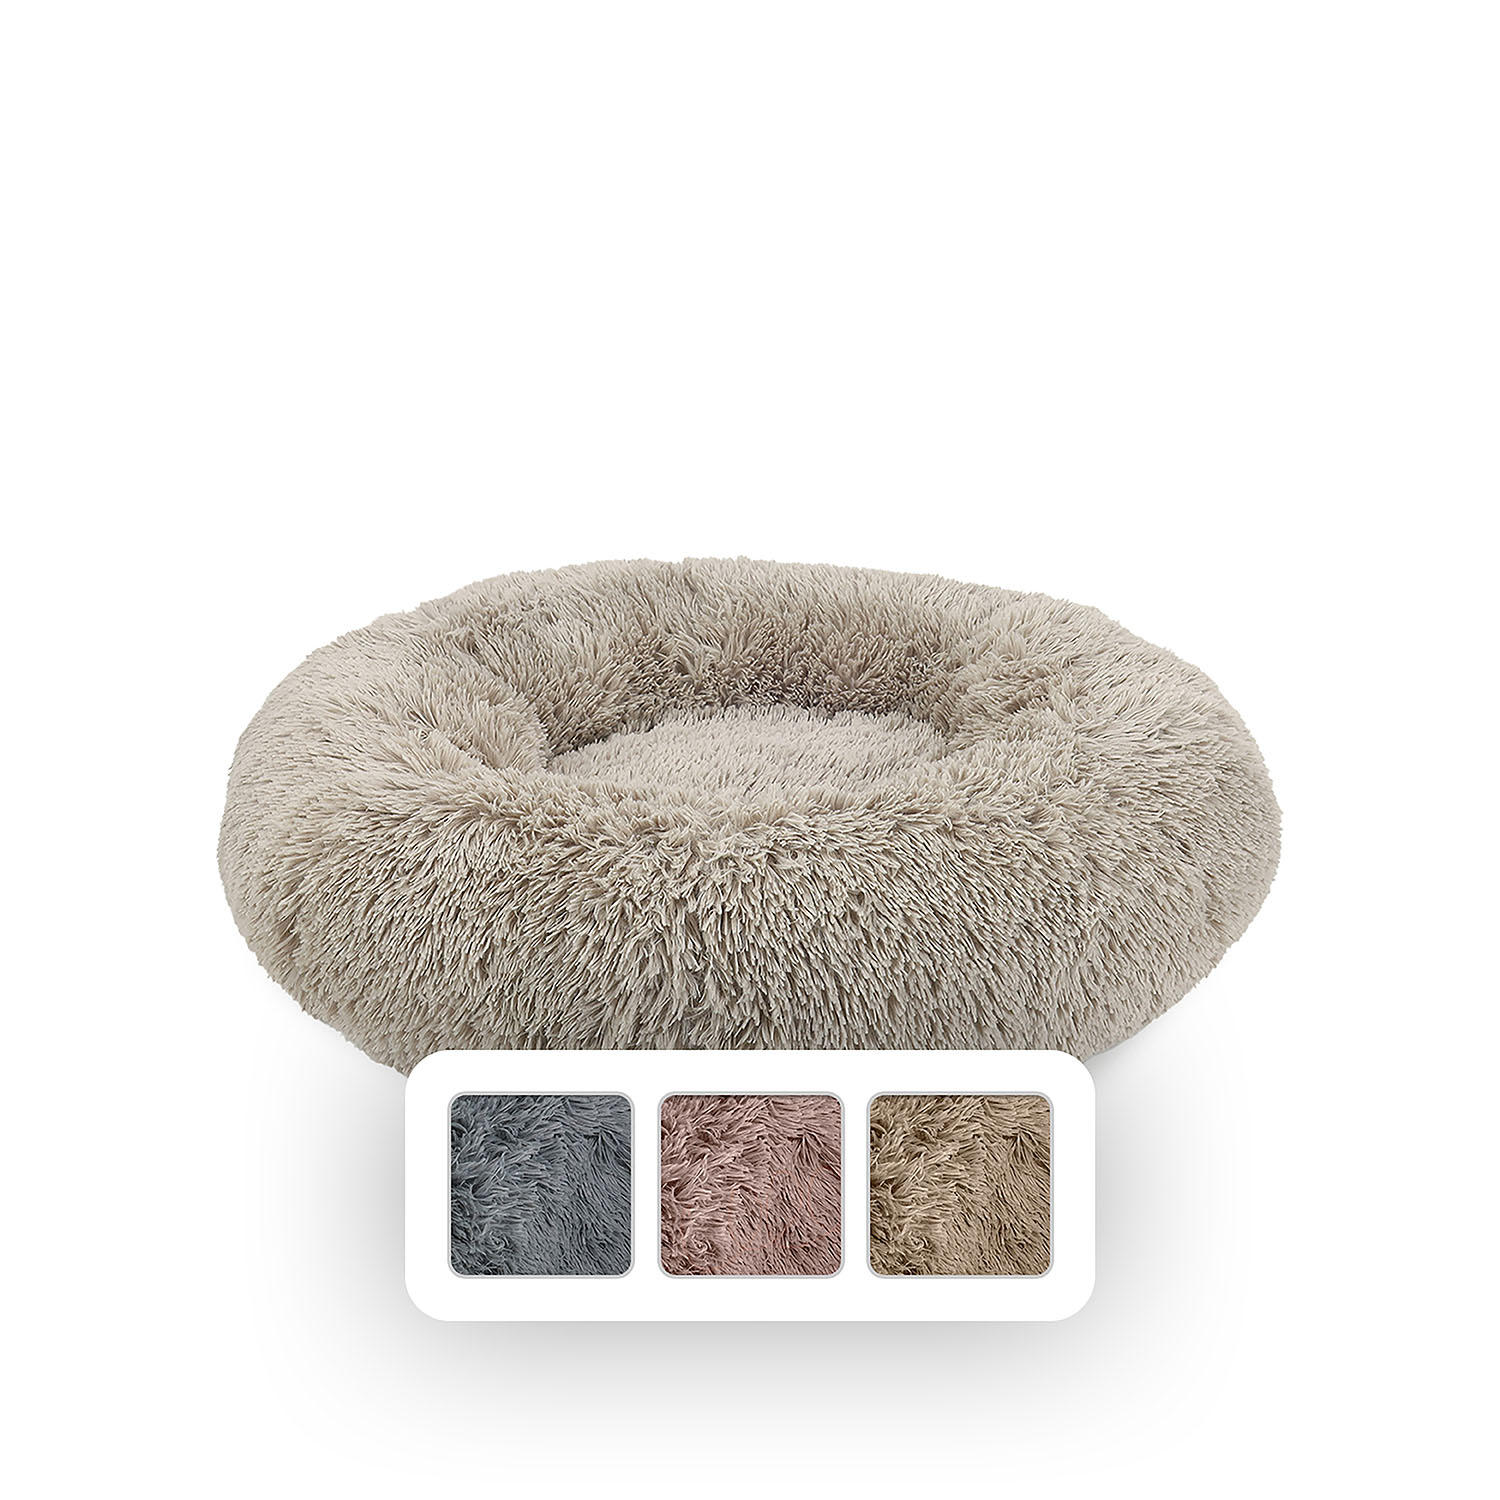 Canine Creations Donut Round Pet Bed, 28' x 28' - Taupe